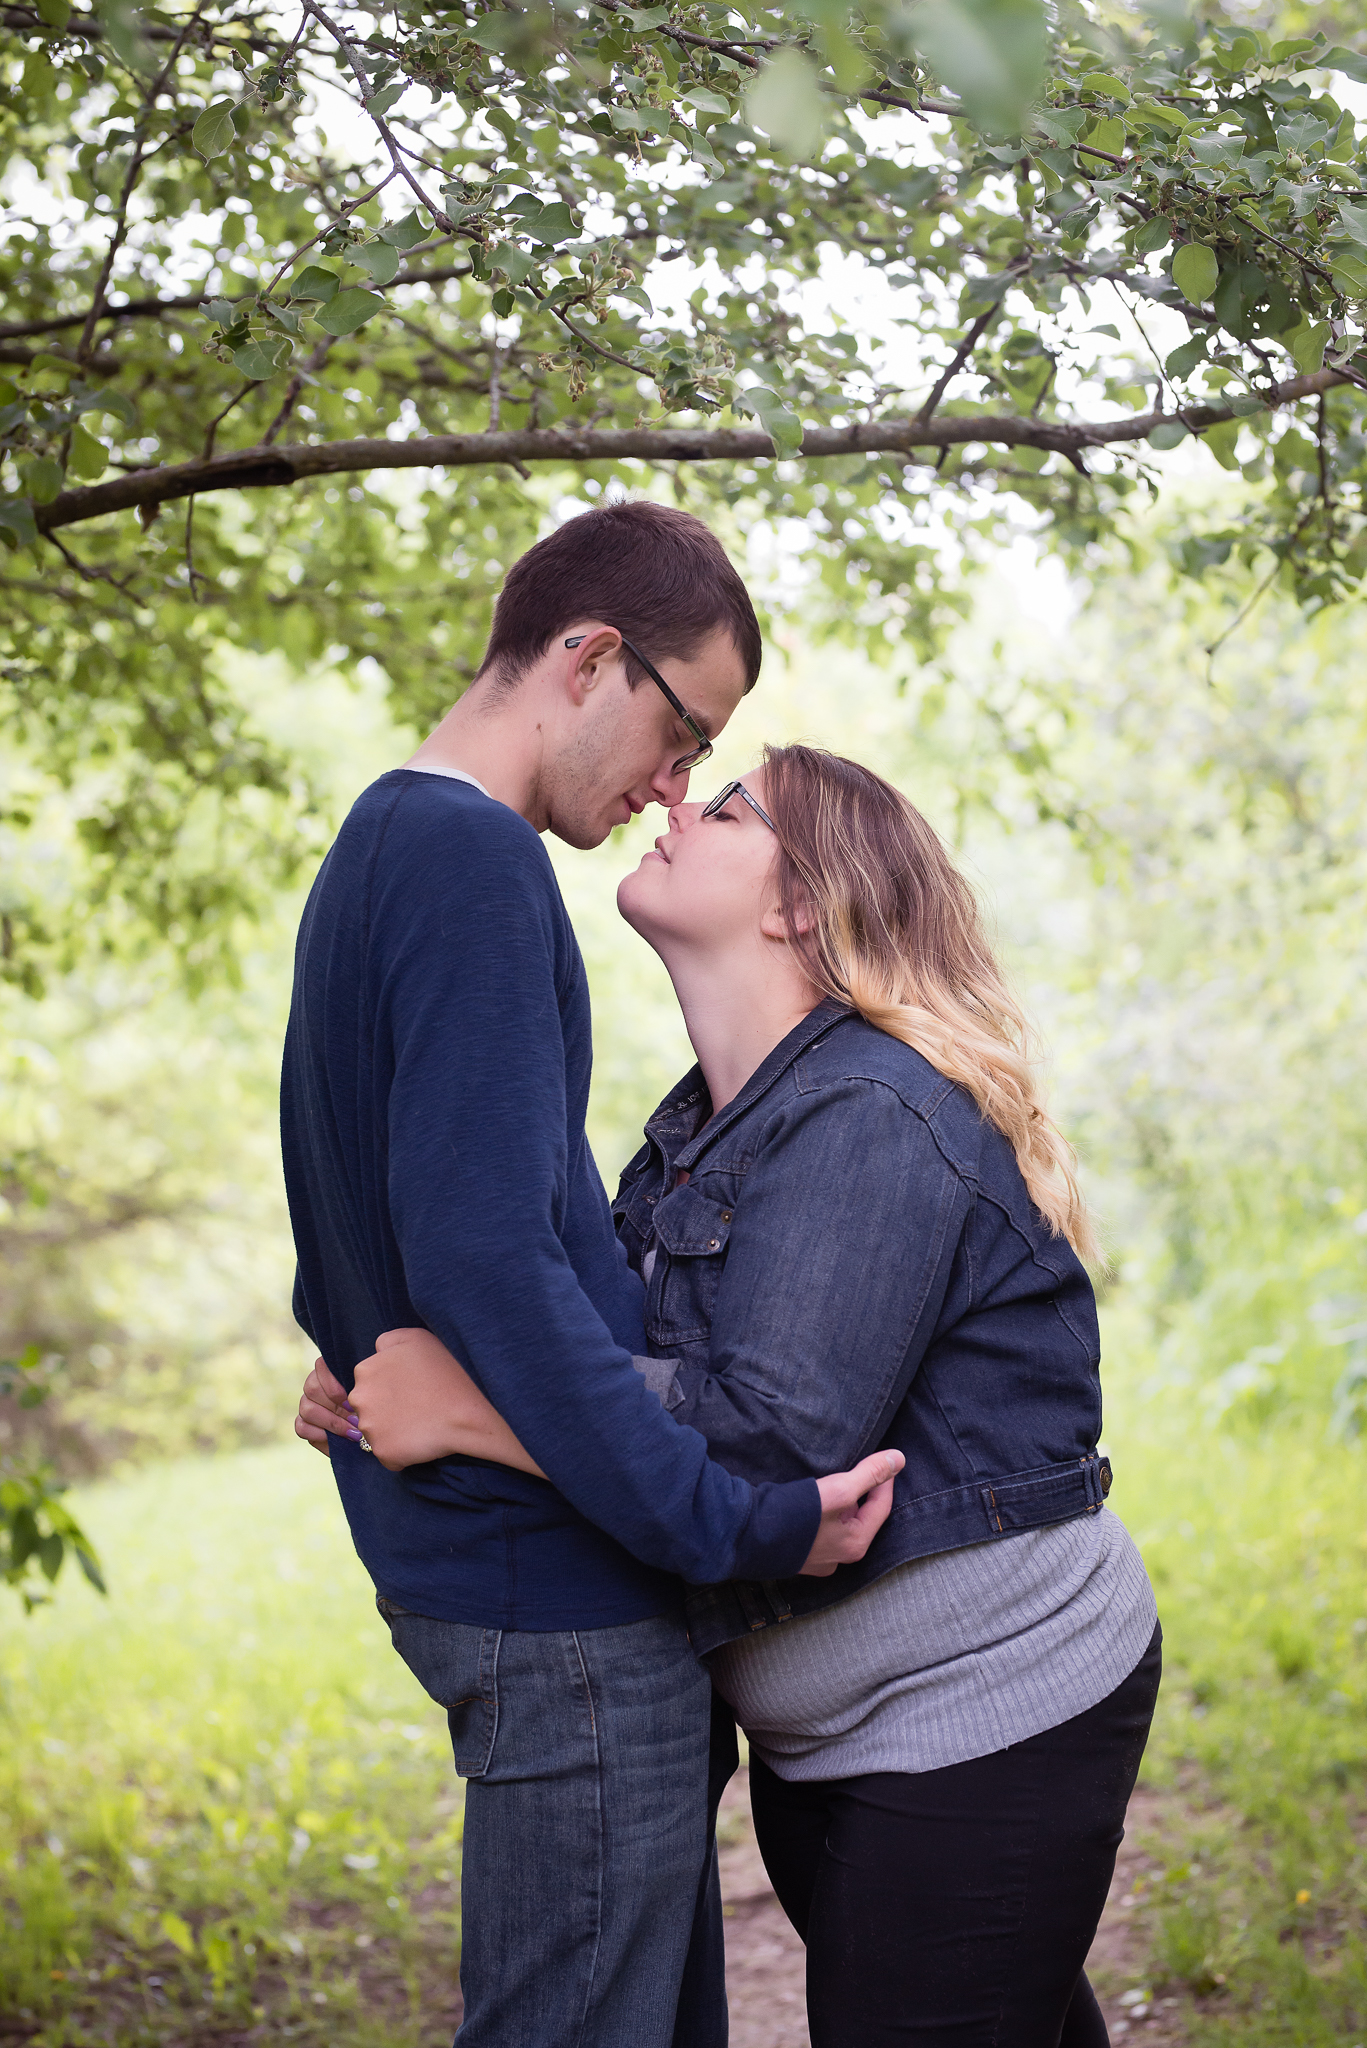 Couples222NaomiLuciennePhotography062018-2-Edit.jpg